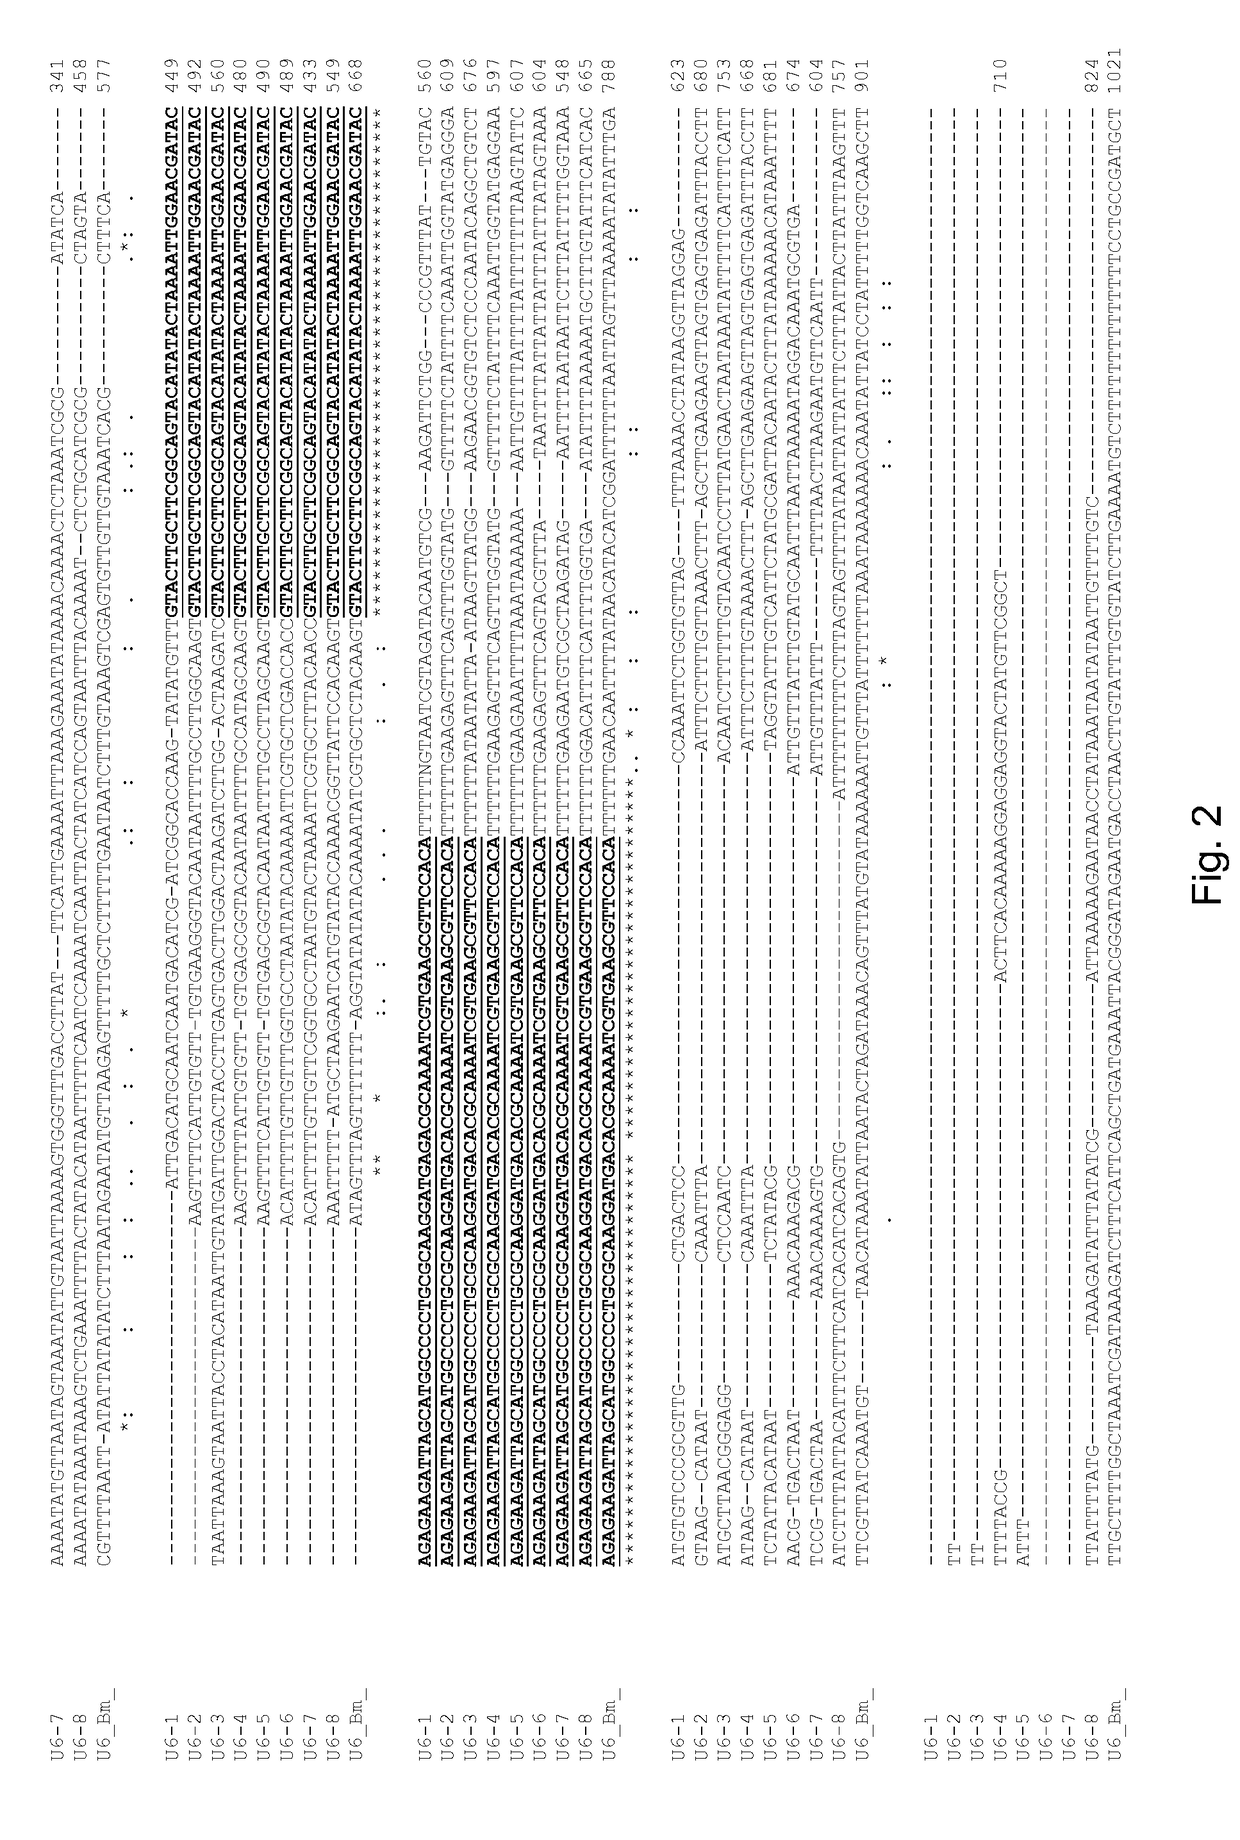 Means and methods for preparing engineered proteins by genetic code expansion in insect cells